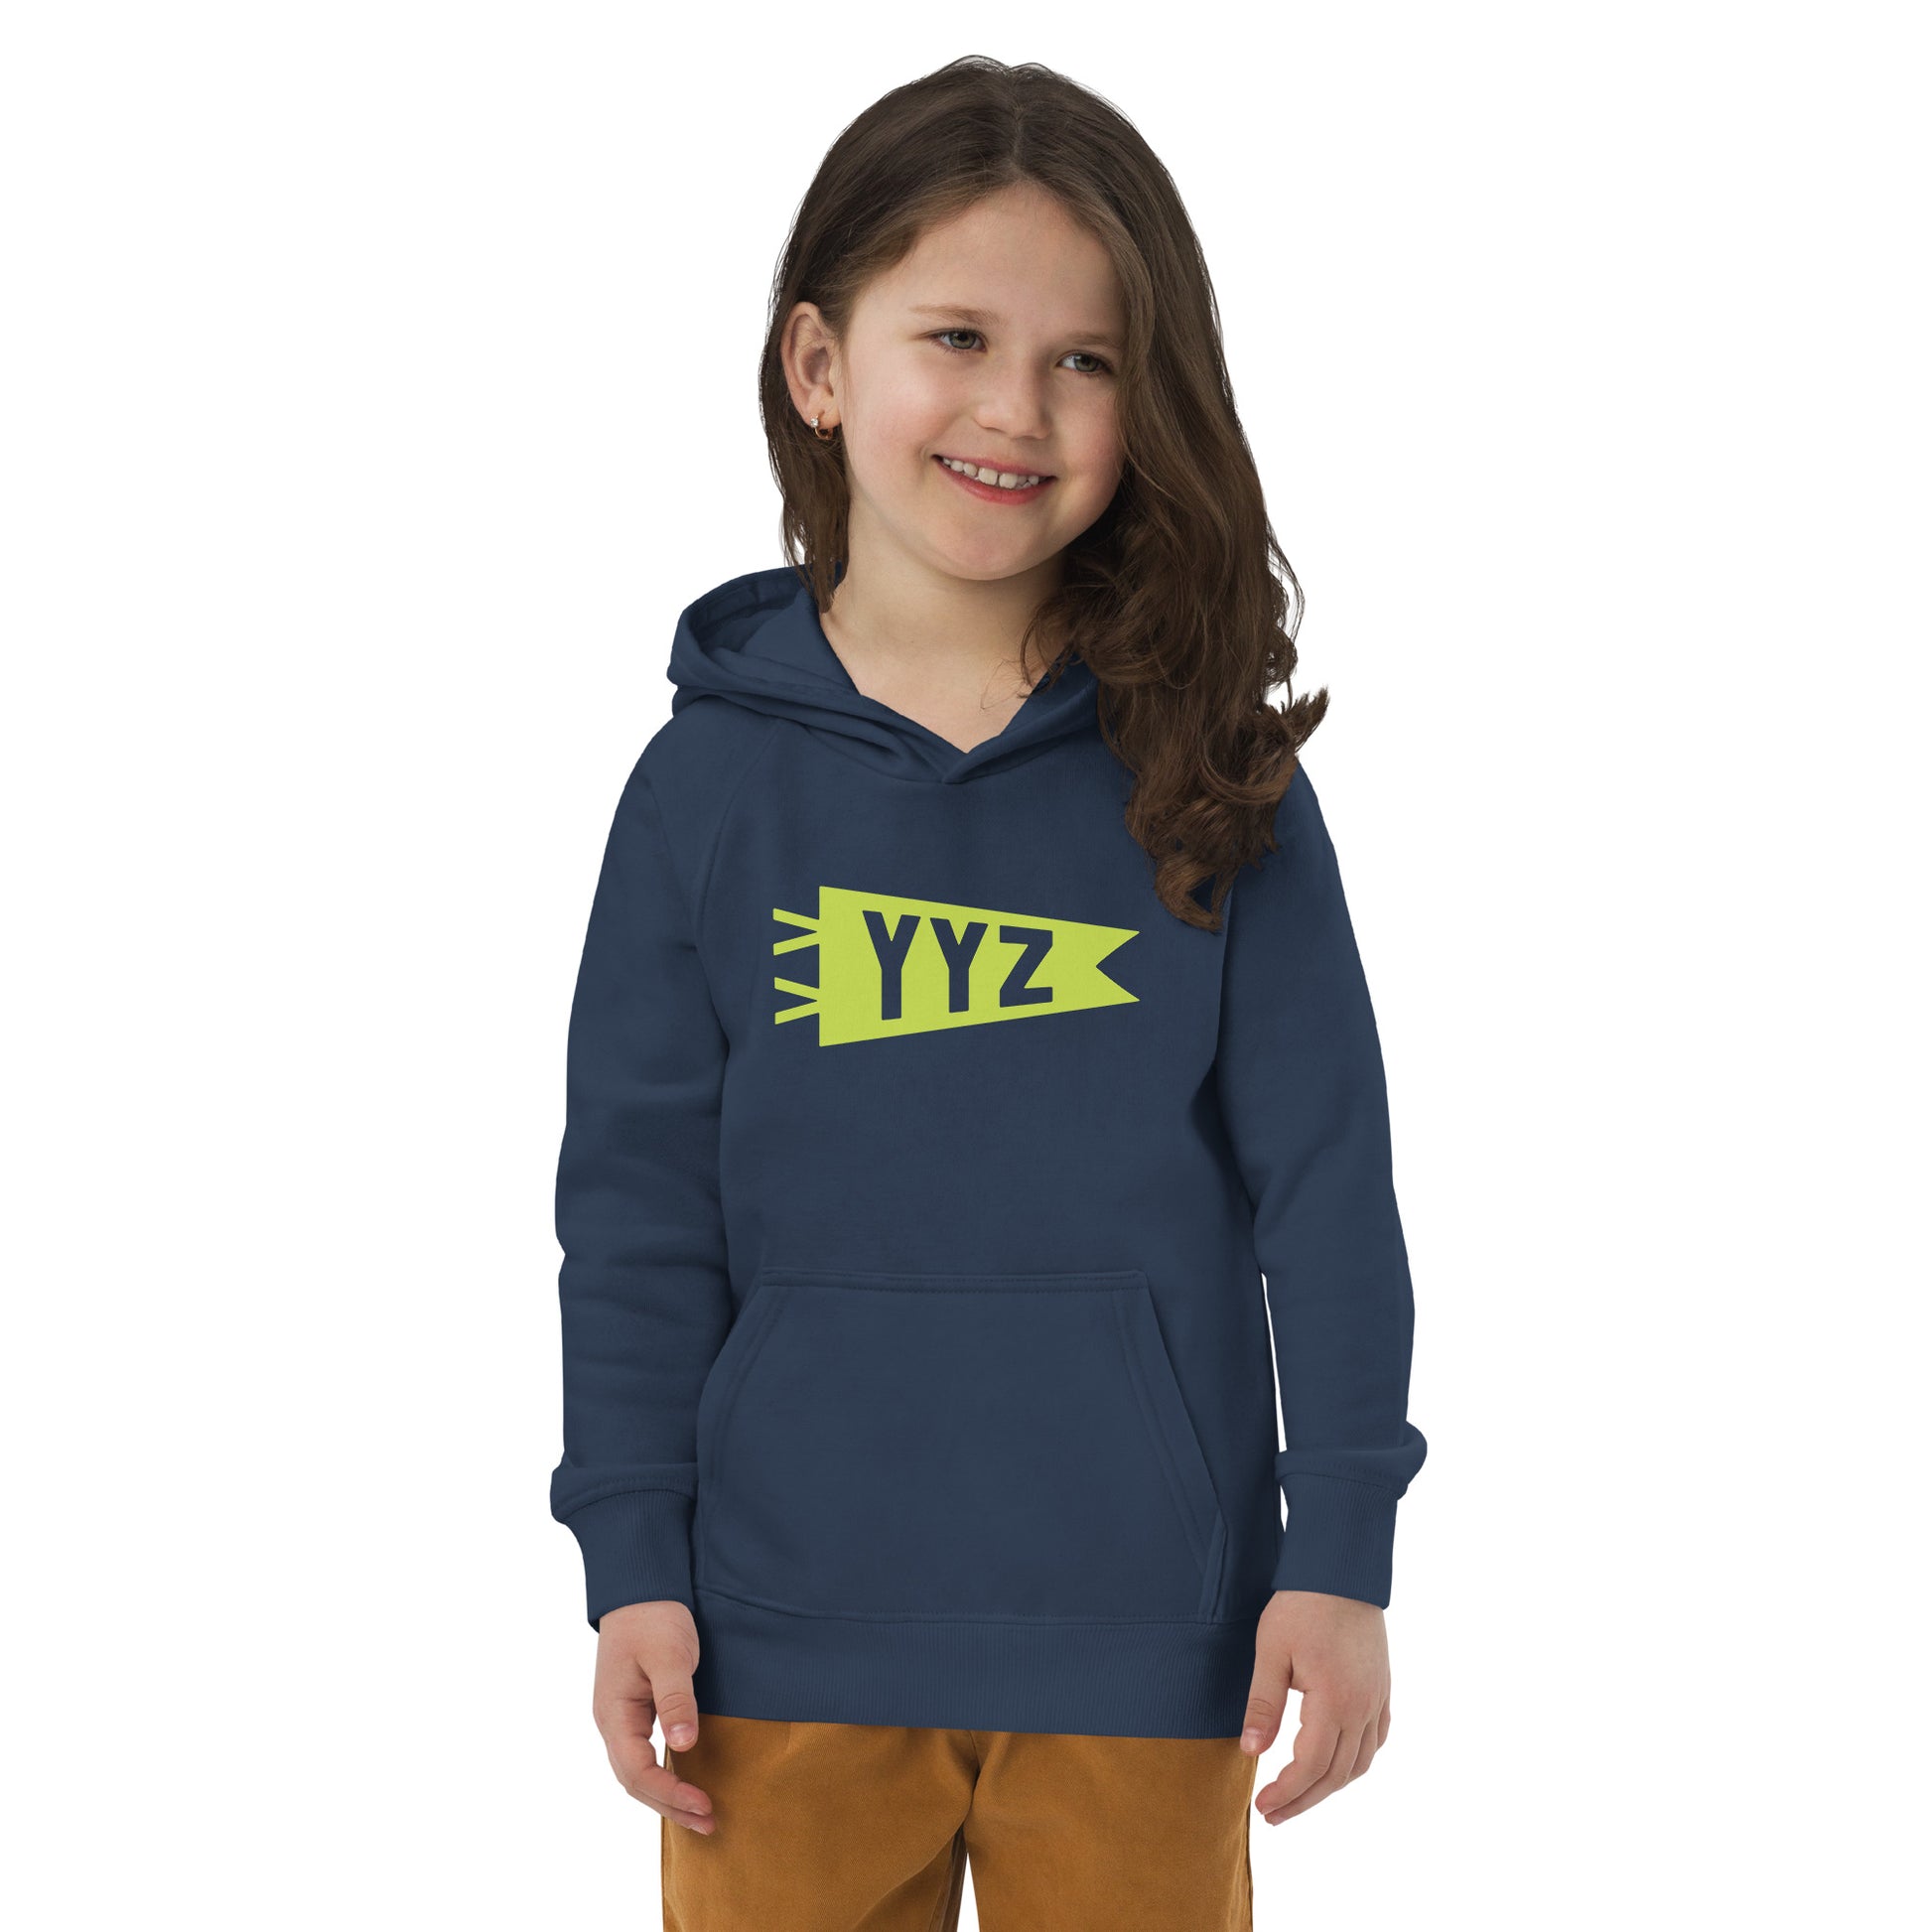 Kid's Sustainable Hoodie - Green Graphic • YYZ Toronto • YHM Designs - Image 07